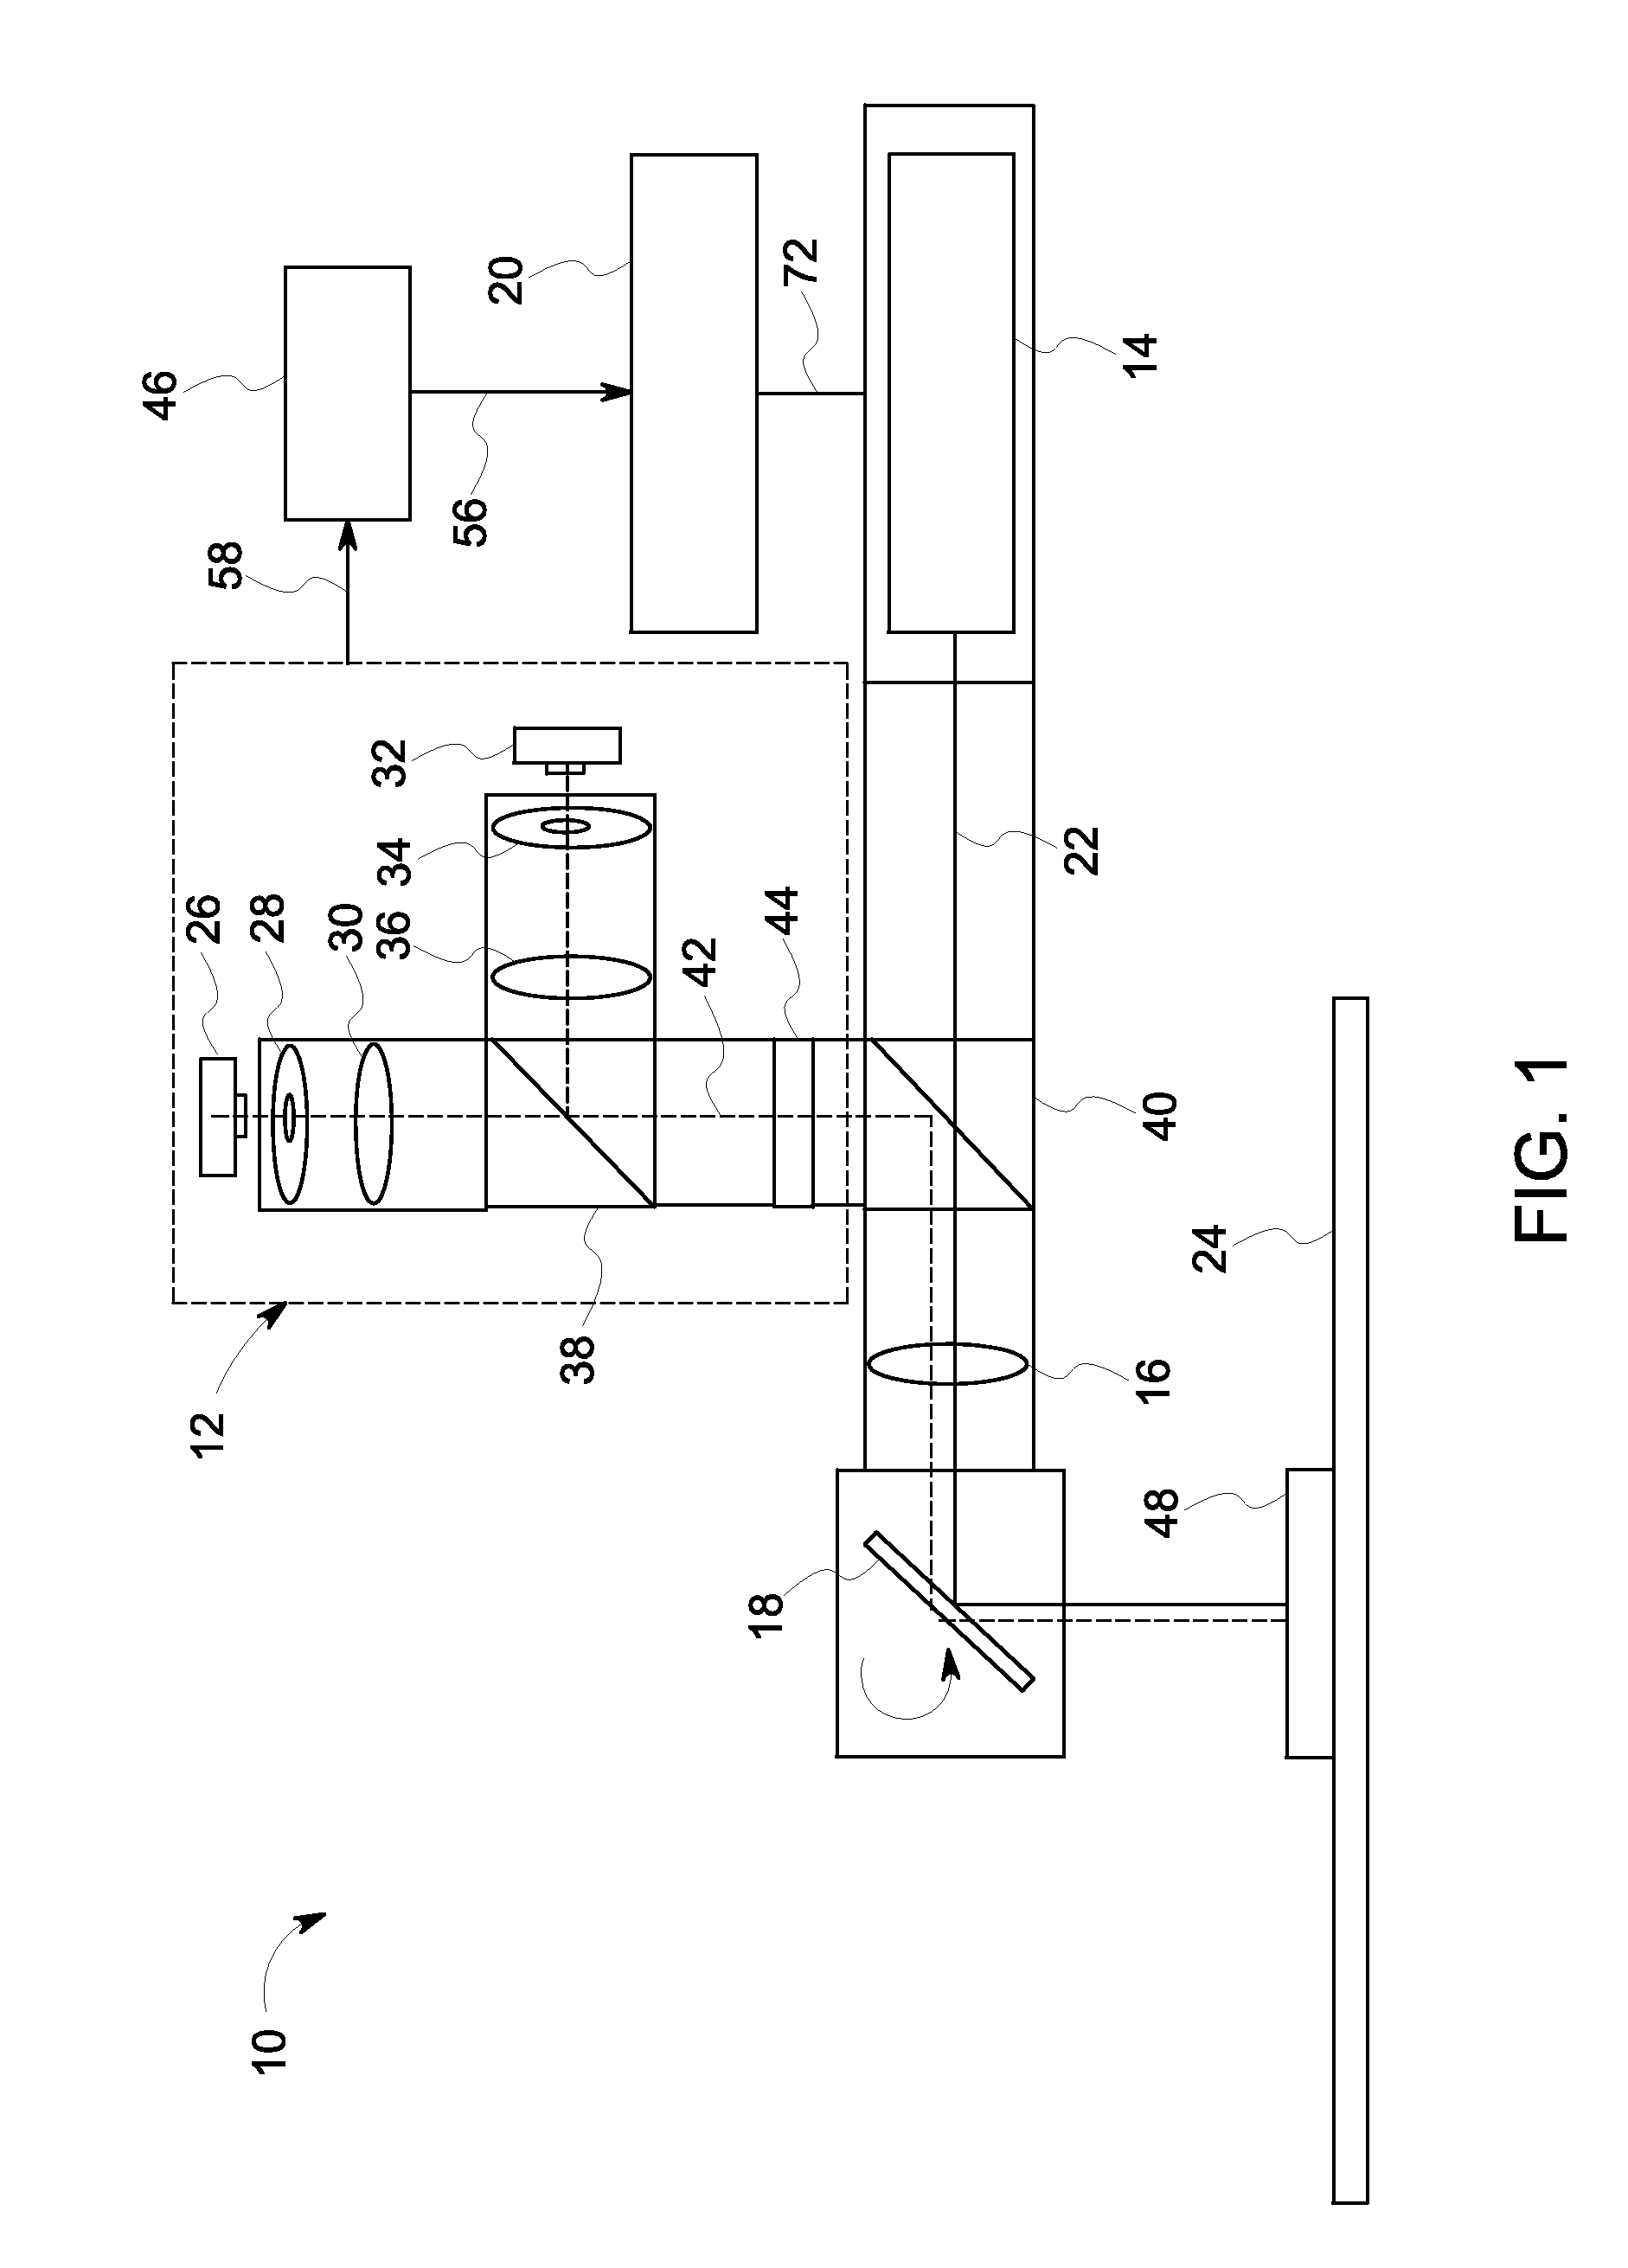 System and methods for real-time enhancement of build parameters of a component